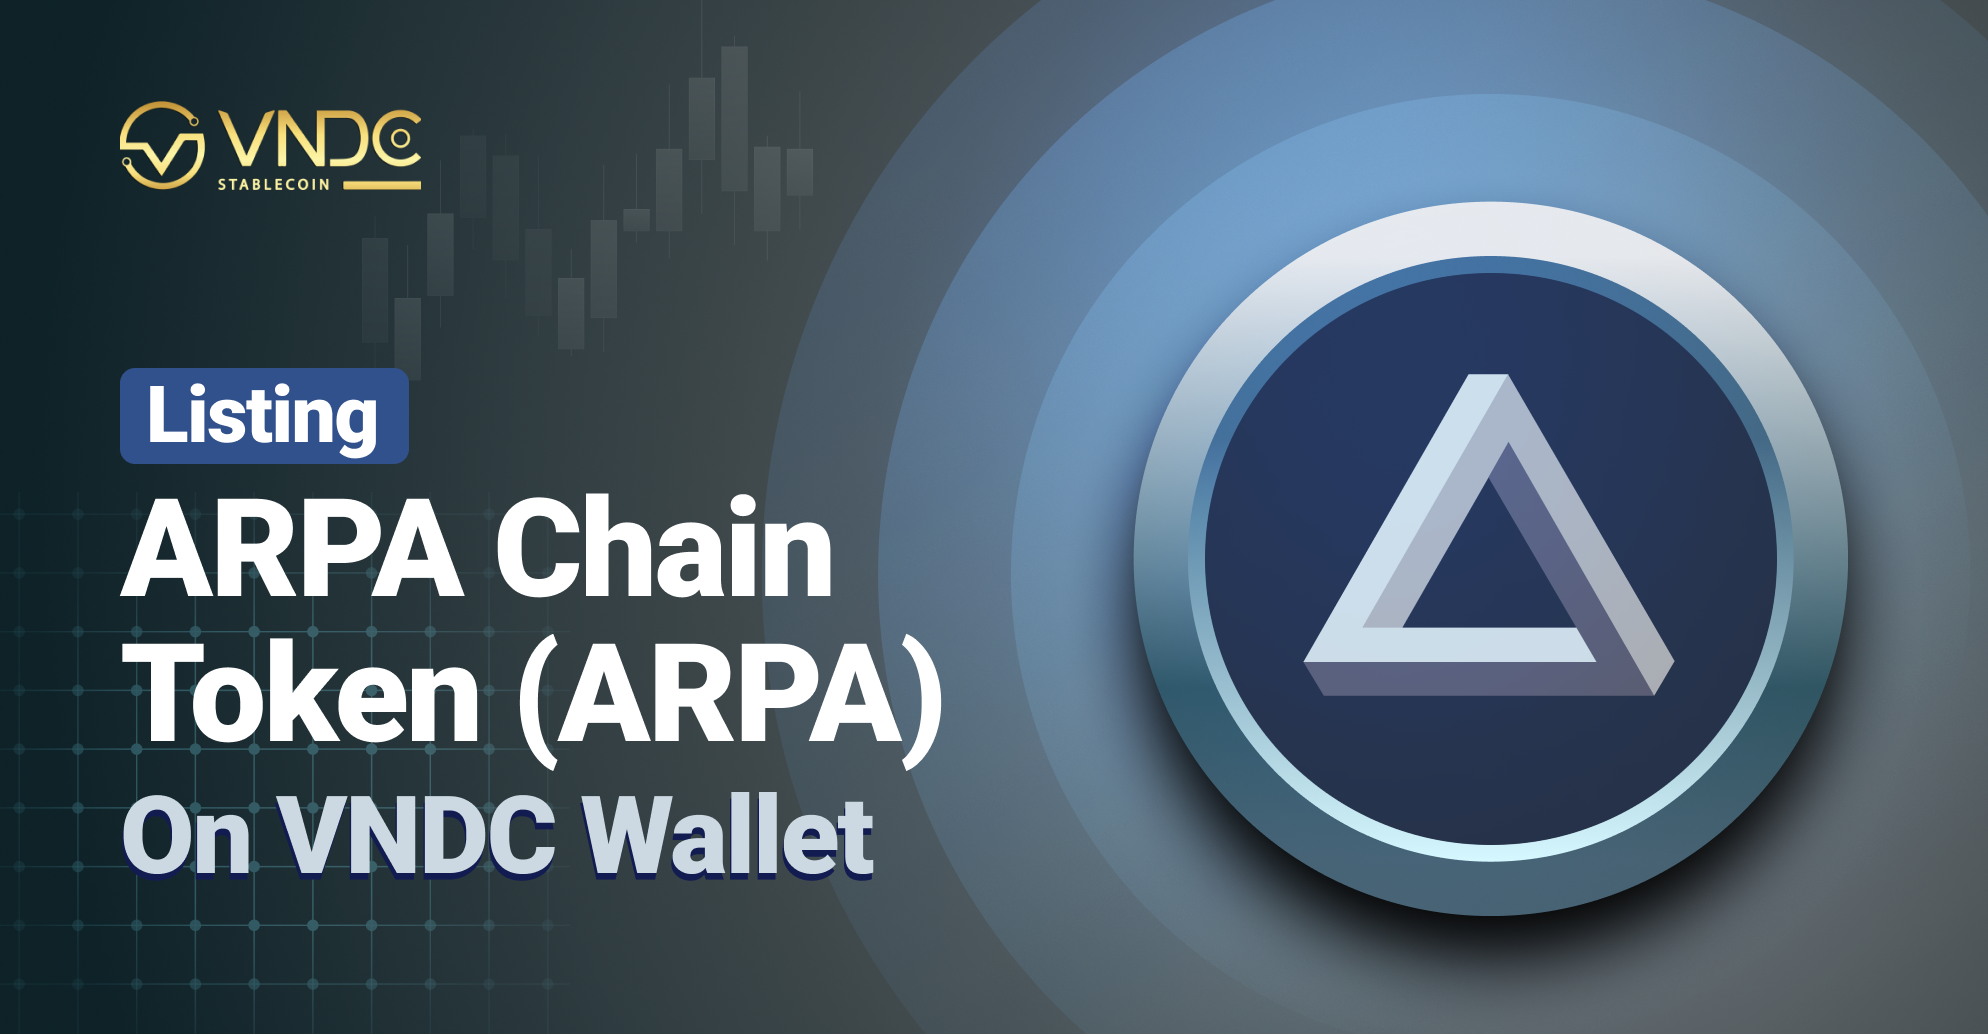 Listing ARPA Chain Token (ARPA) on VNDC Wallet